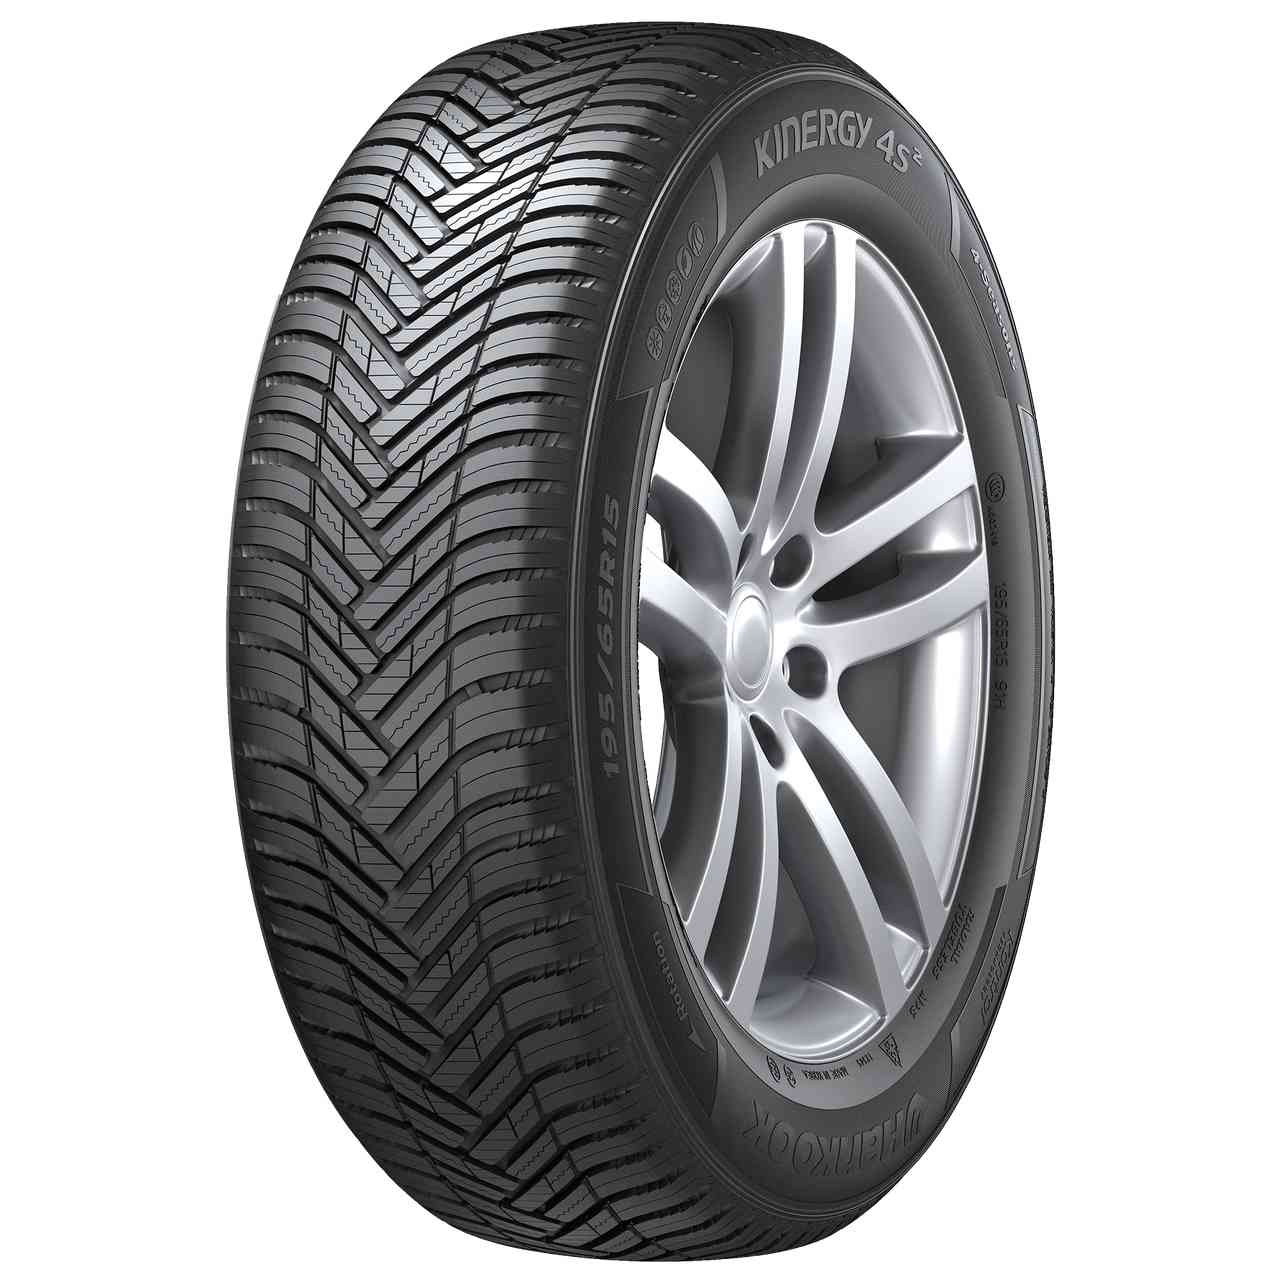 HANKOOK KINERGY 4S 2 (H750) 215/50R17 95W BSW